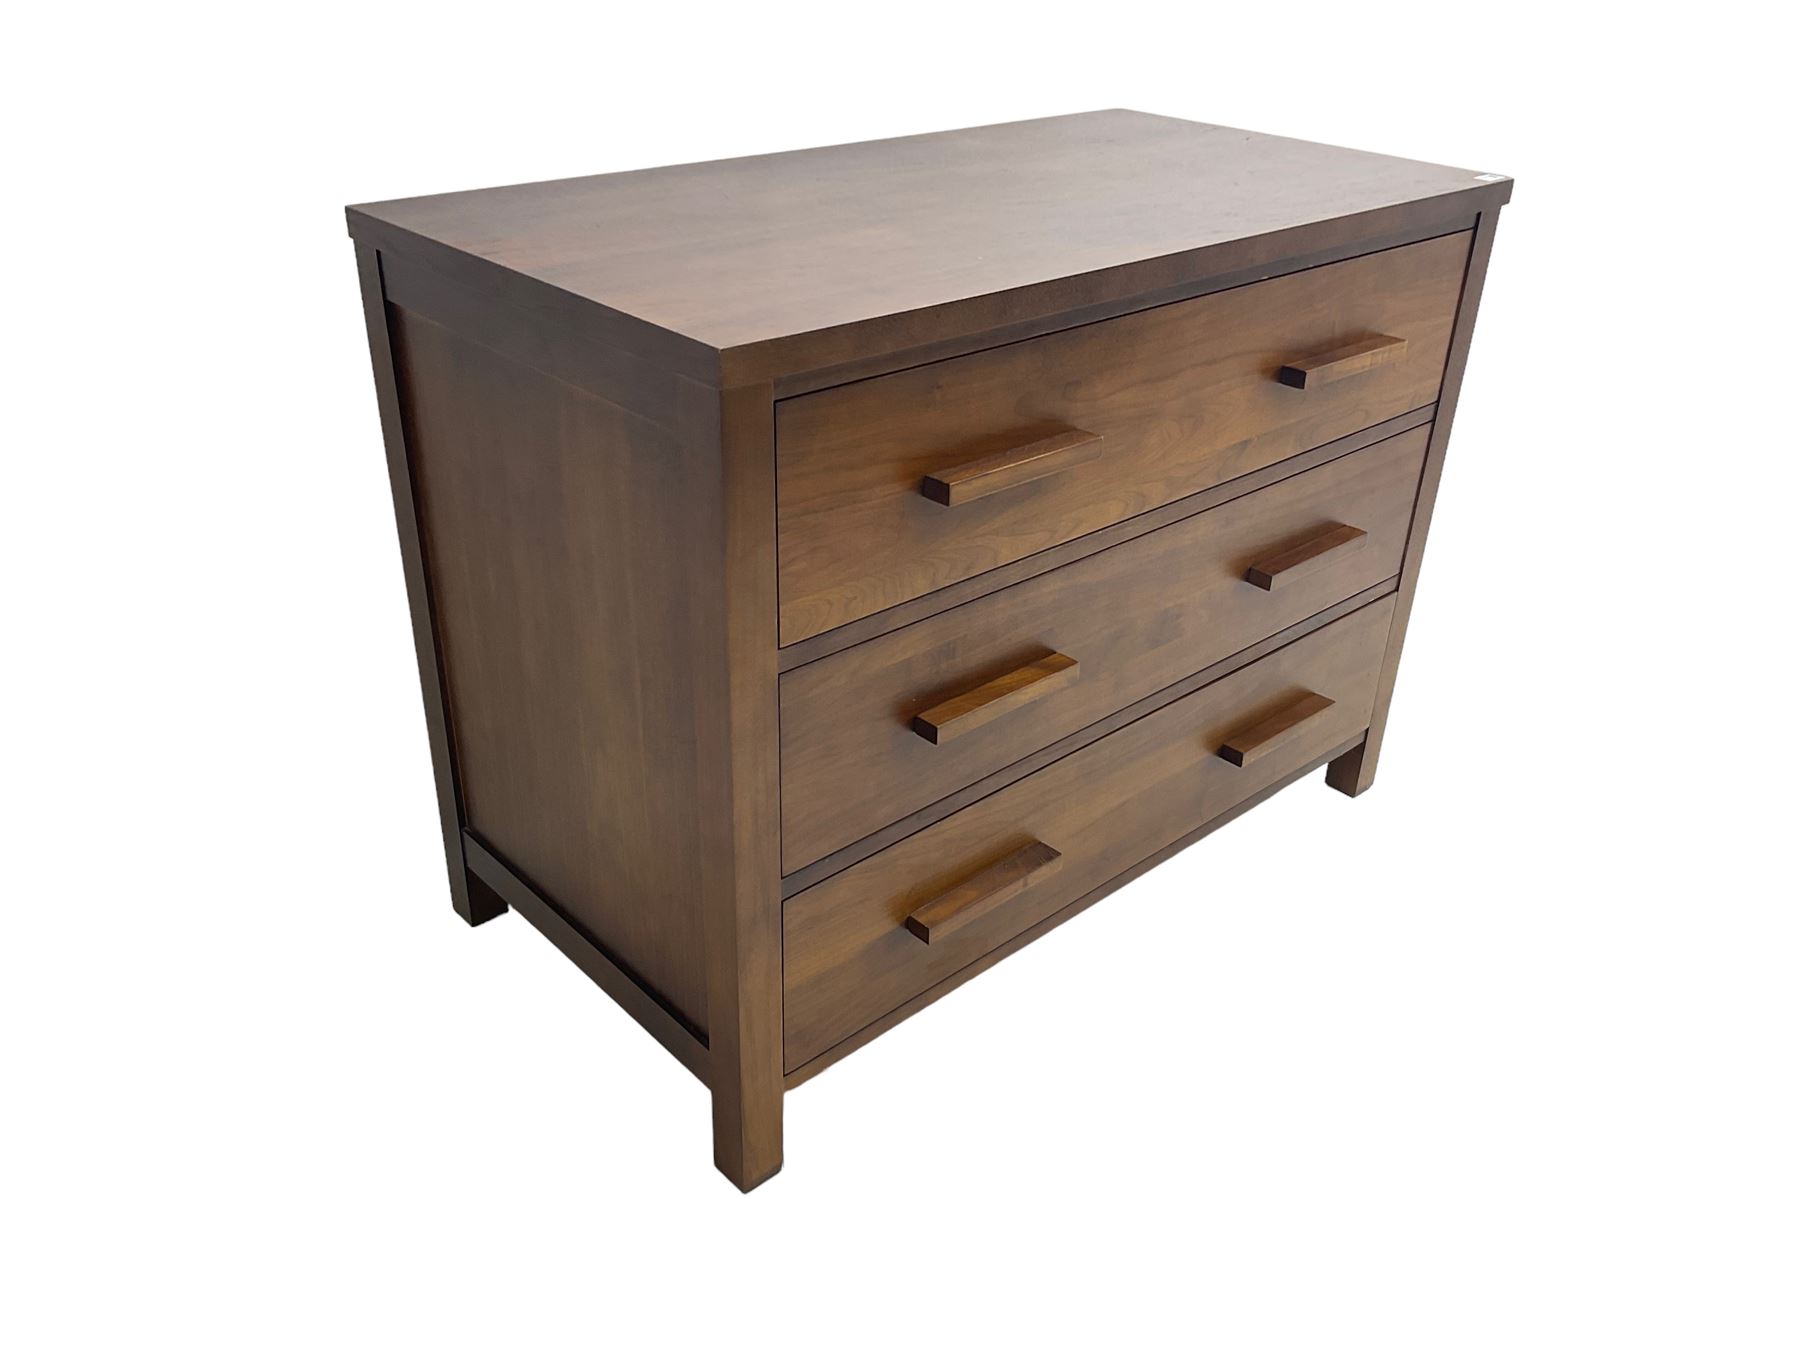 Large contemporary cherry wood chest - Image 7 of 8